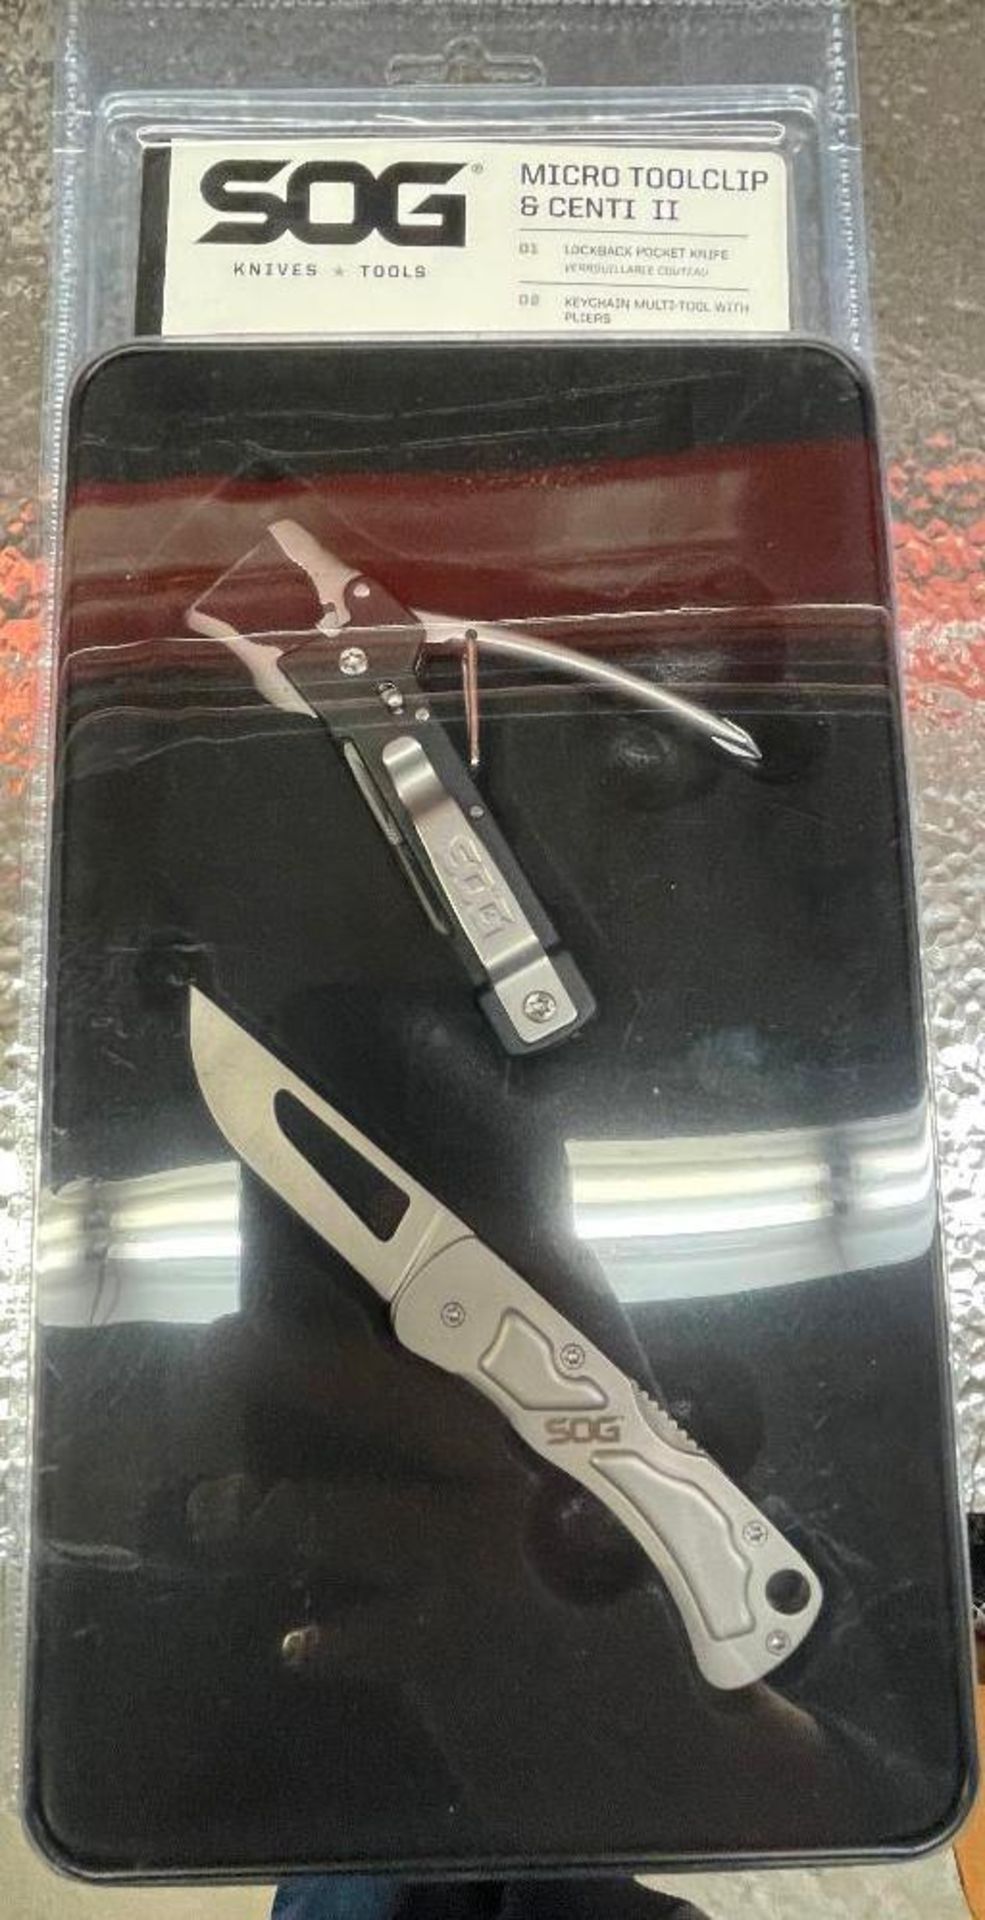 DESCRIPTION: (4) SOG MICRO TOOL CLIP & CENTI II TOOL SETS. ADDITIONAL INFORMATION RETAIL VALUE $144